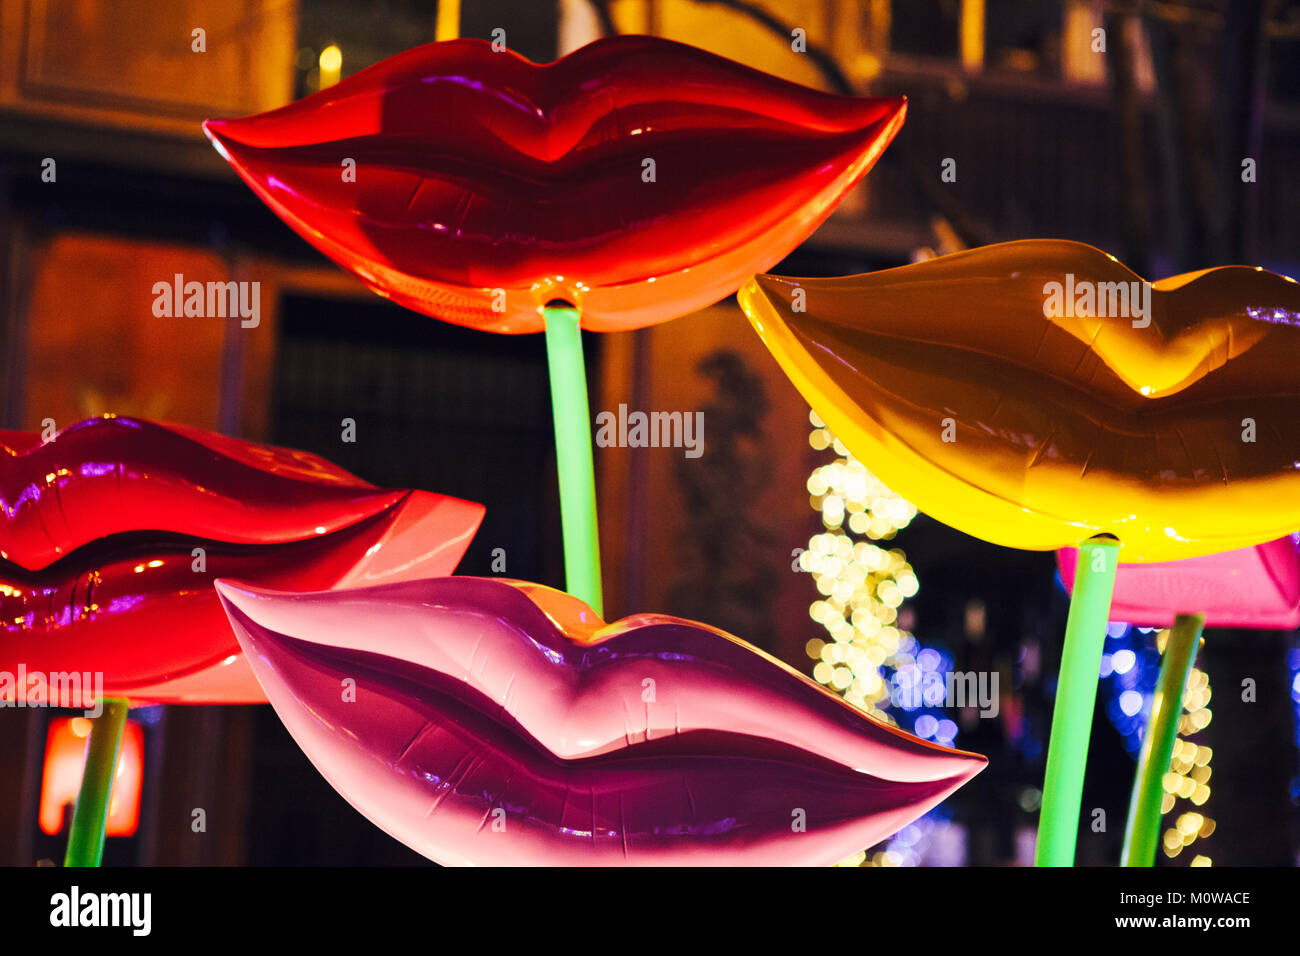 Lips, Les Levres - image of a famous Stravinsky fountain in Paris with beautiful colourful lips at night, close up, December 2011. Stock Photo